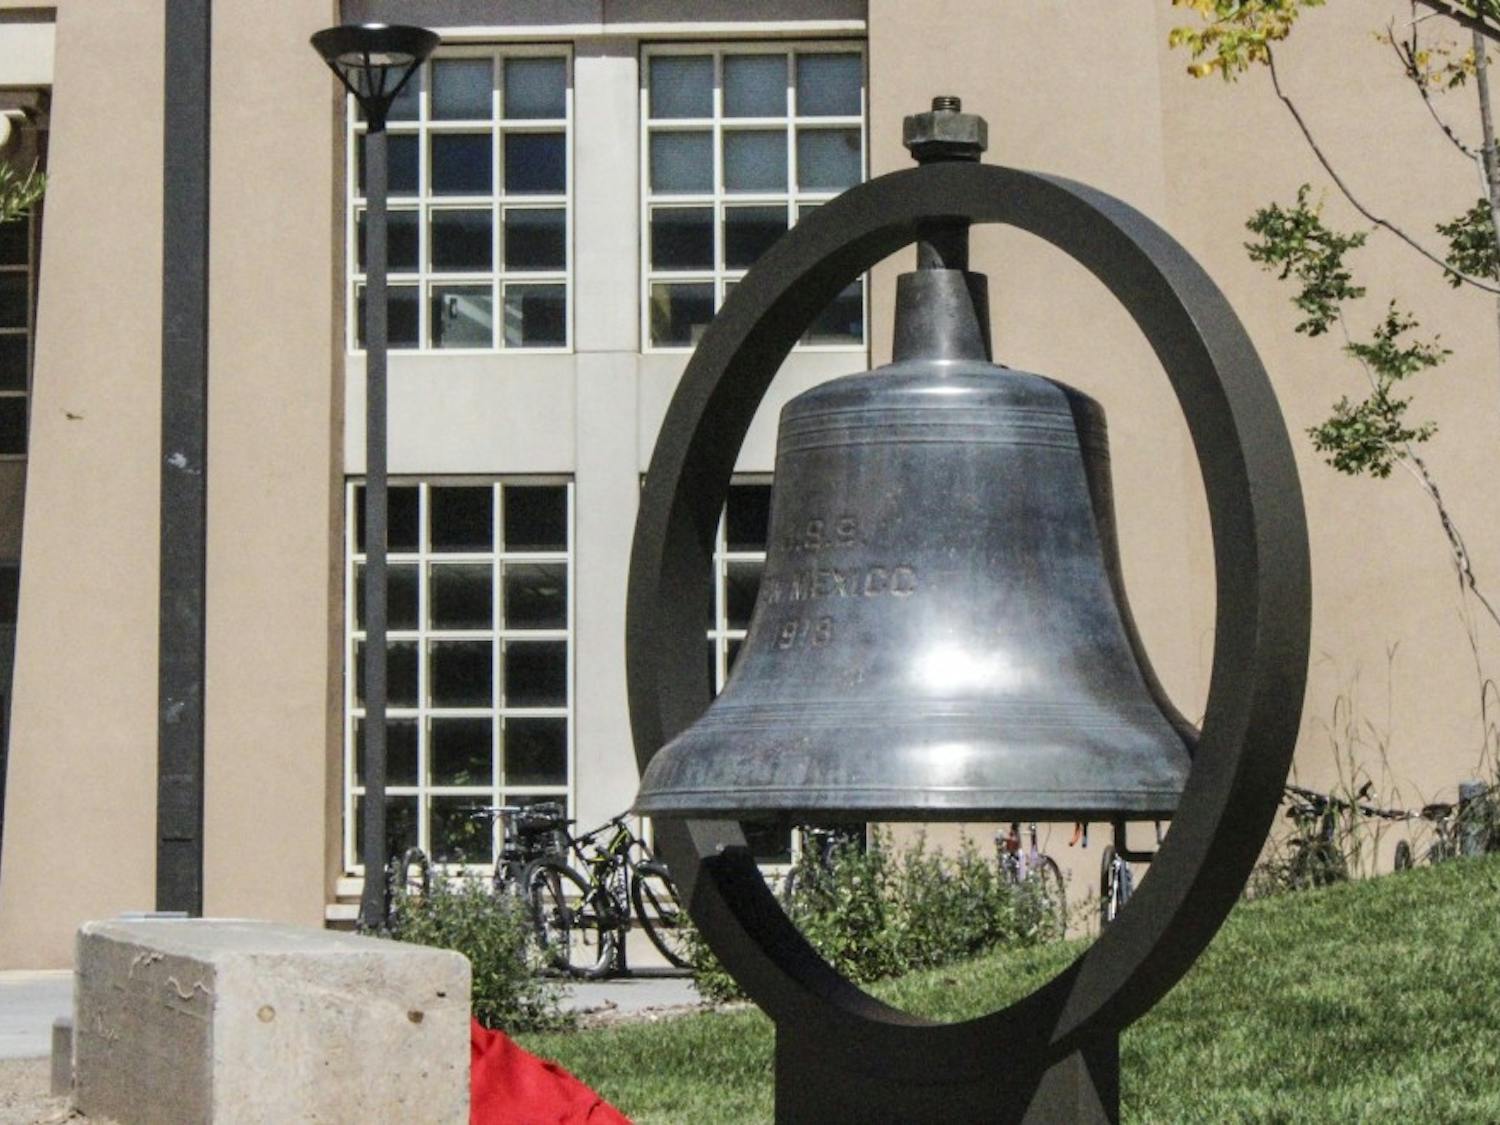 The USS New Mexico bell in front of Zimmerman Library after its rededication ceremony on Thursday, Sep 13. The bell is one of two that were aboard the ship. The bell would sound alarms or be used to bury at sea those killed in action by the kamikaze attacks.